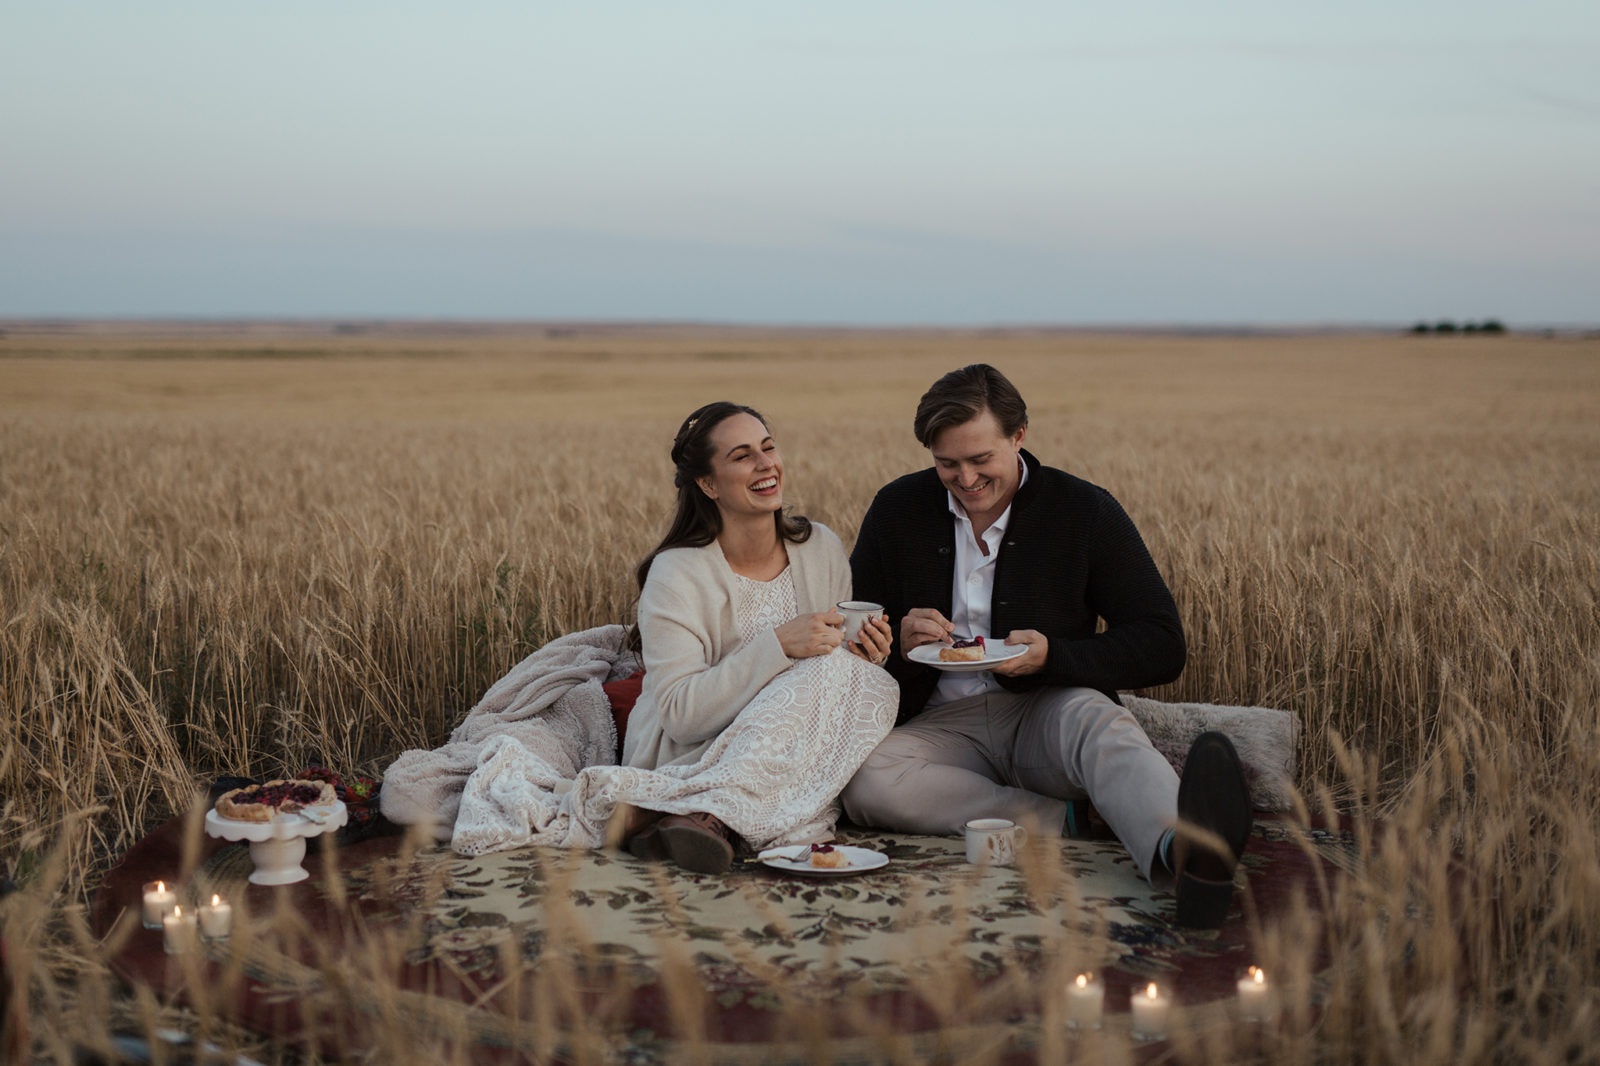 A small farmyard picnic in a rural countryside field, the bride and groom enjoy their wedding dessert and warm drinks in vintage mugs, fall vow renewal inspiration. 